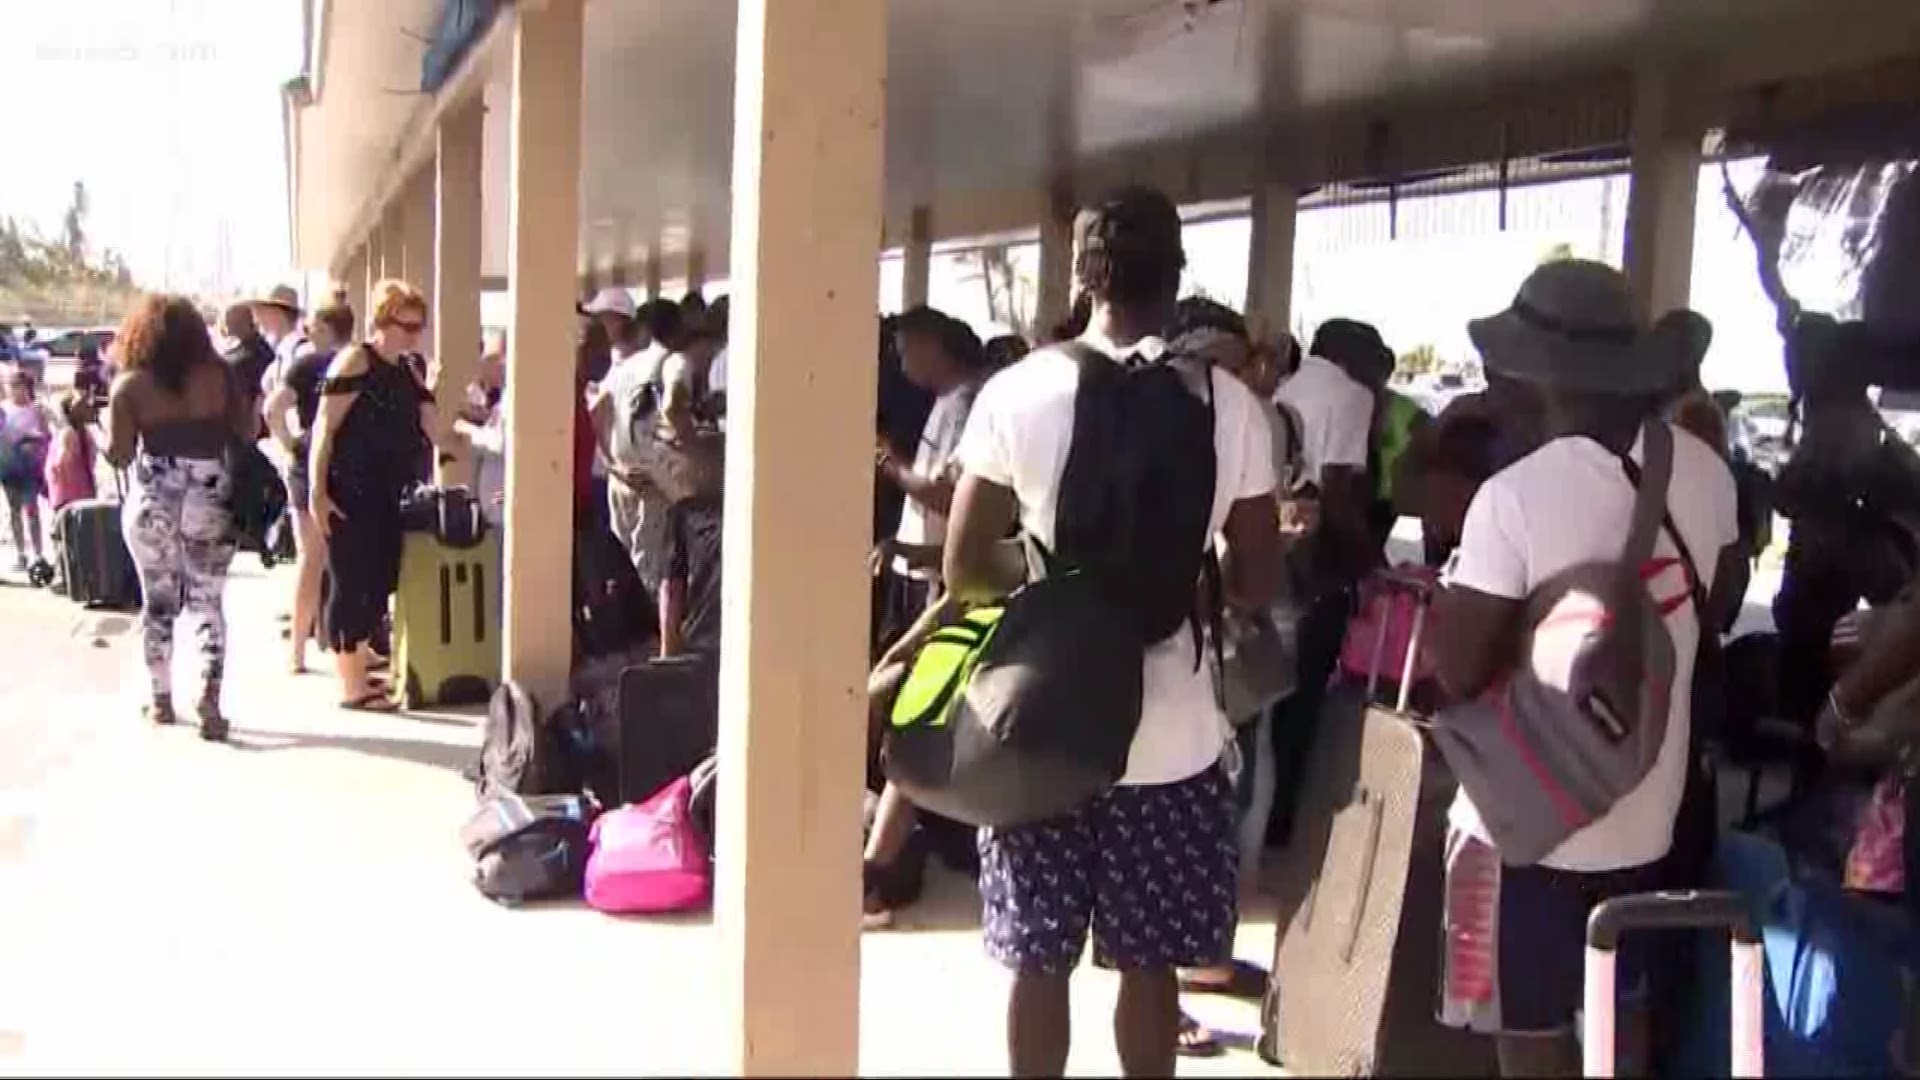 70,000 people were left homeless, without food and water after Hurricane Dorian devastated the Bahamas. A cruise line tried to bring 1,400 survivors to Florida. Reportedly 130 men, women and children were forced to leave the ship before it headed to the U.S. because they don’t have paperwork. President Trump said, “We have to be very careful."